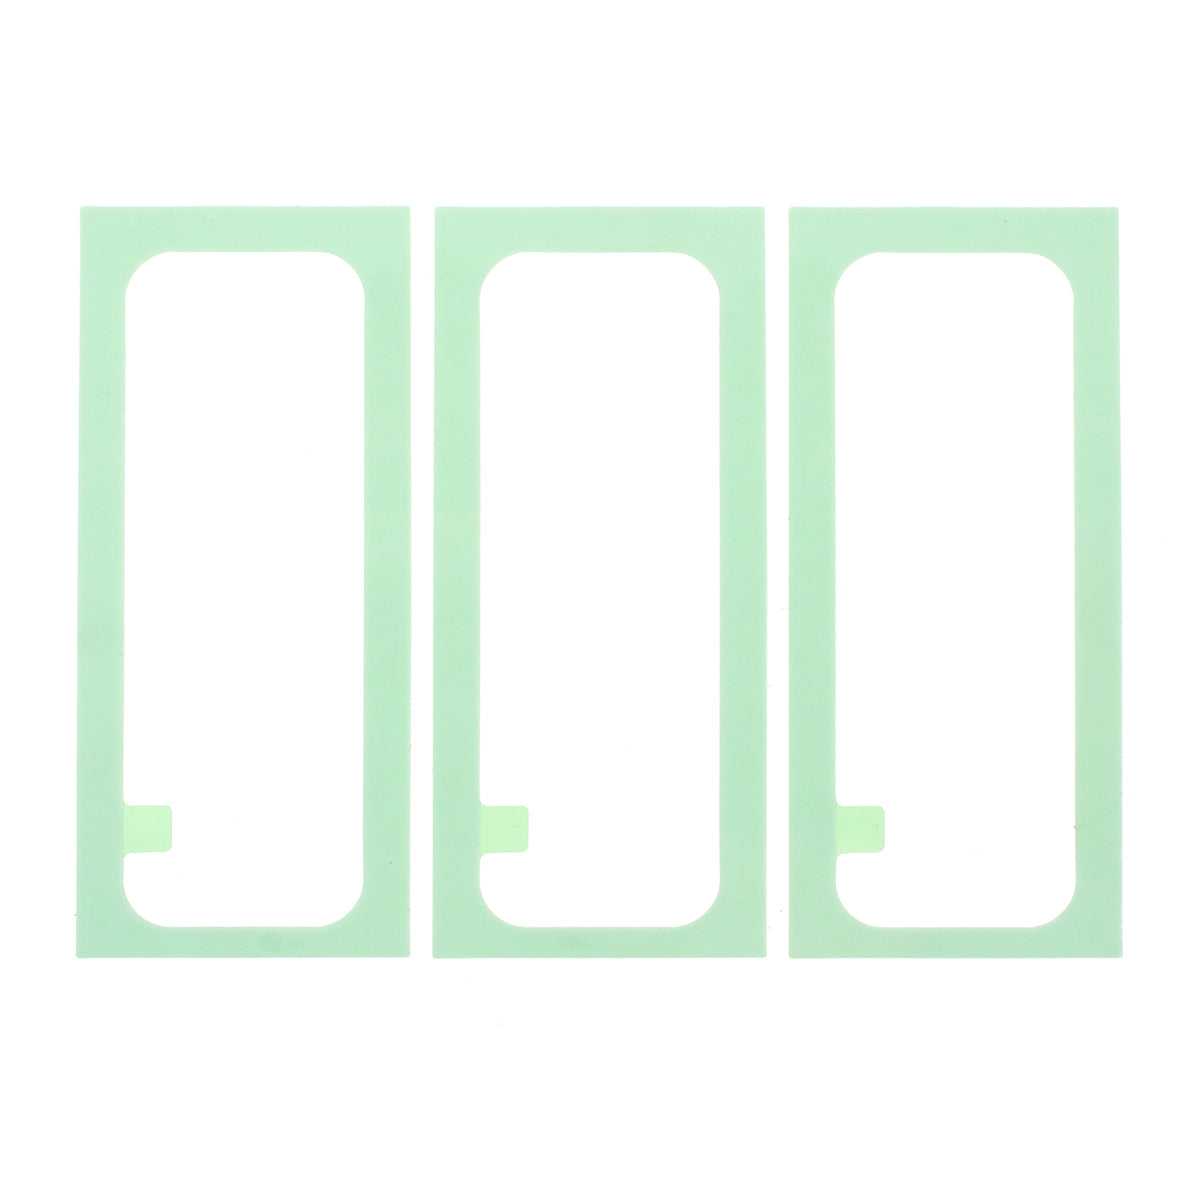 10 Pcs/Pack OEM Battery Adhesive Tape Stickers for Samsung Galaxy Note 8 N950